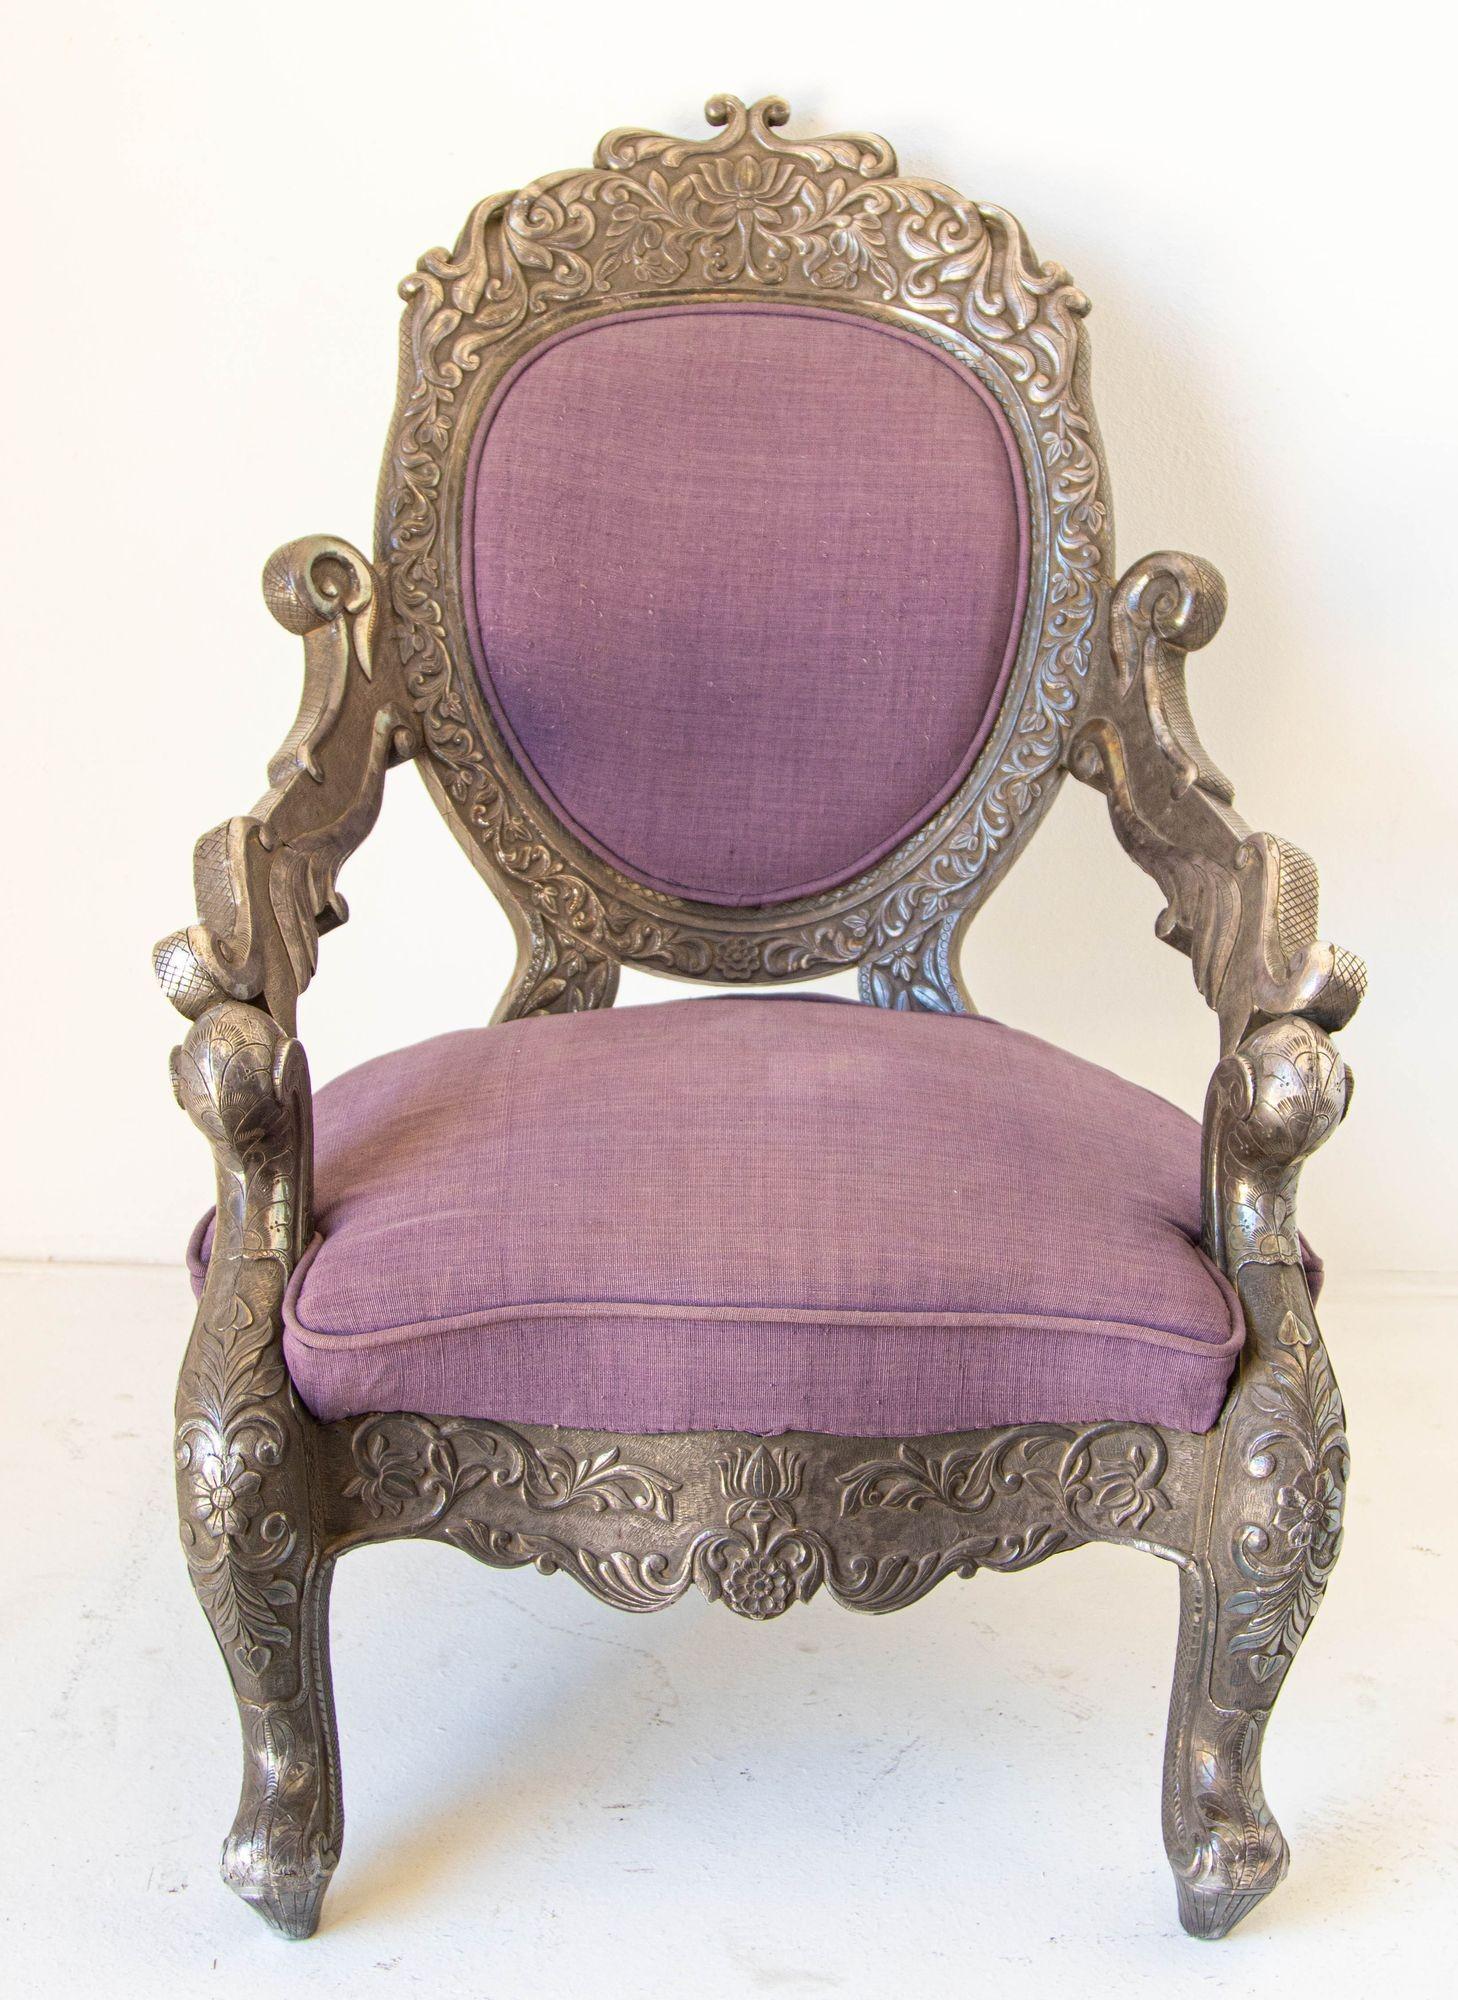 Antique Anglo Indian Armchair Throne Silver Embossed Throne late 19th Century.
Anglo-Indian silver embossed throne chair, the detailed silvered metal chair frame has been hammered and embosses to create beautiful Indian floral motifs.
A very